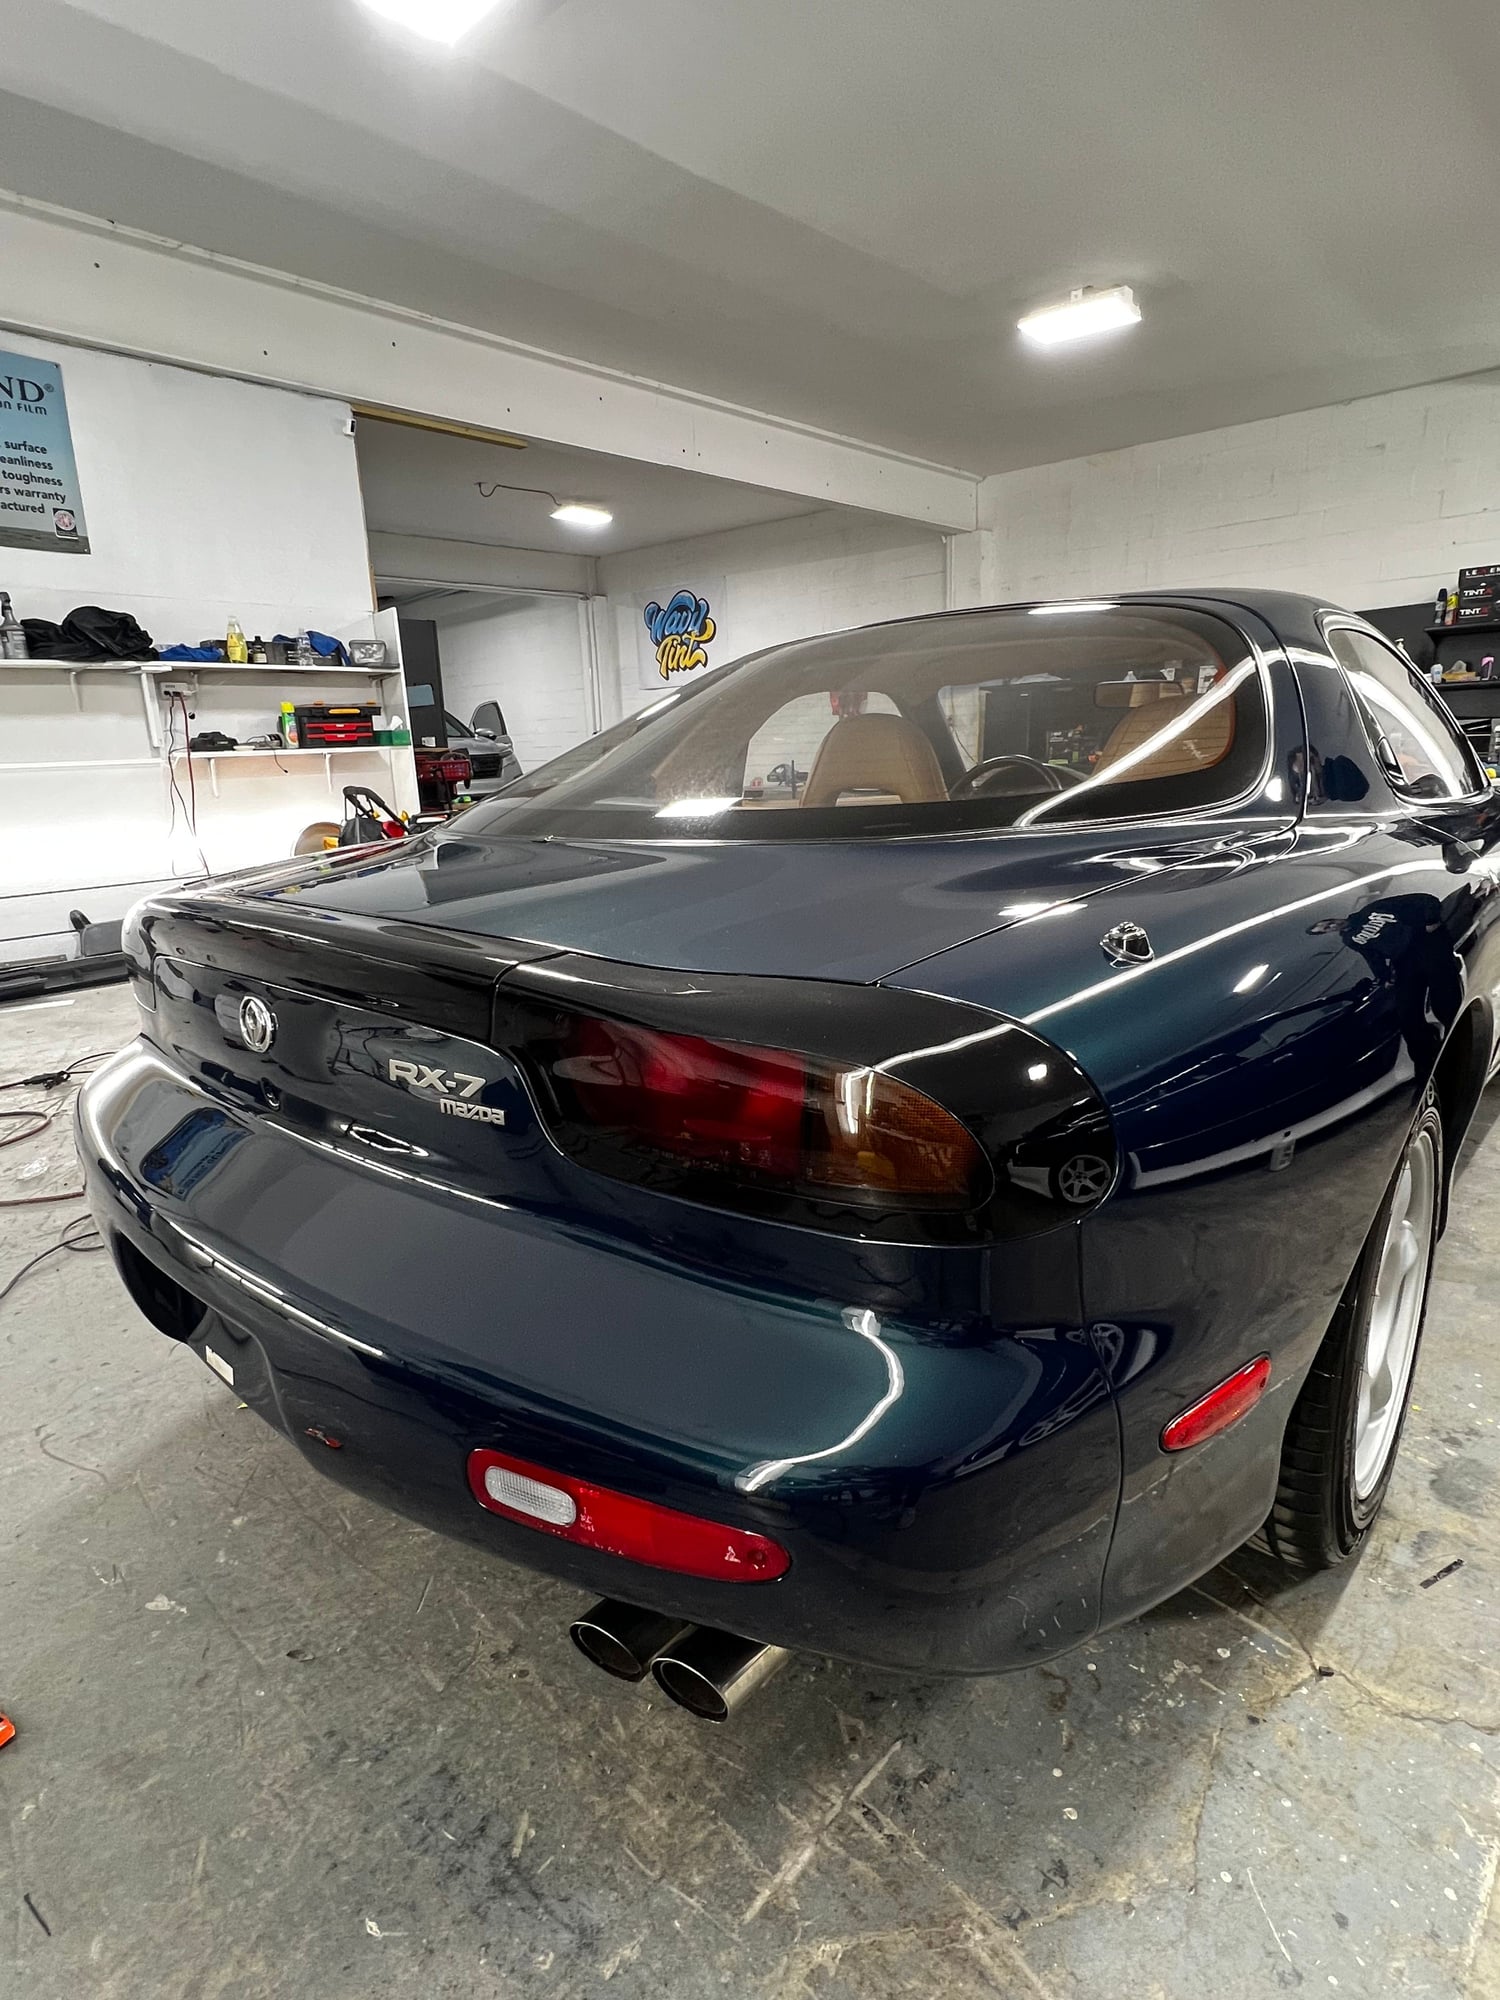 1993 Mazda RX-7 - *** Mazda Rx-7 - Single Owner - Hardtop - All Original *** - Used - VIN JM1FD3310P0207339 - 77,700 Miles - Other - 2WD - Manual - Coupe - Blue - Allentown, PA 18031, United States